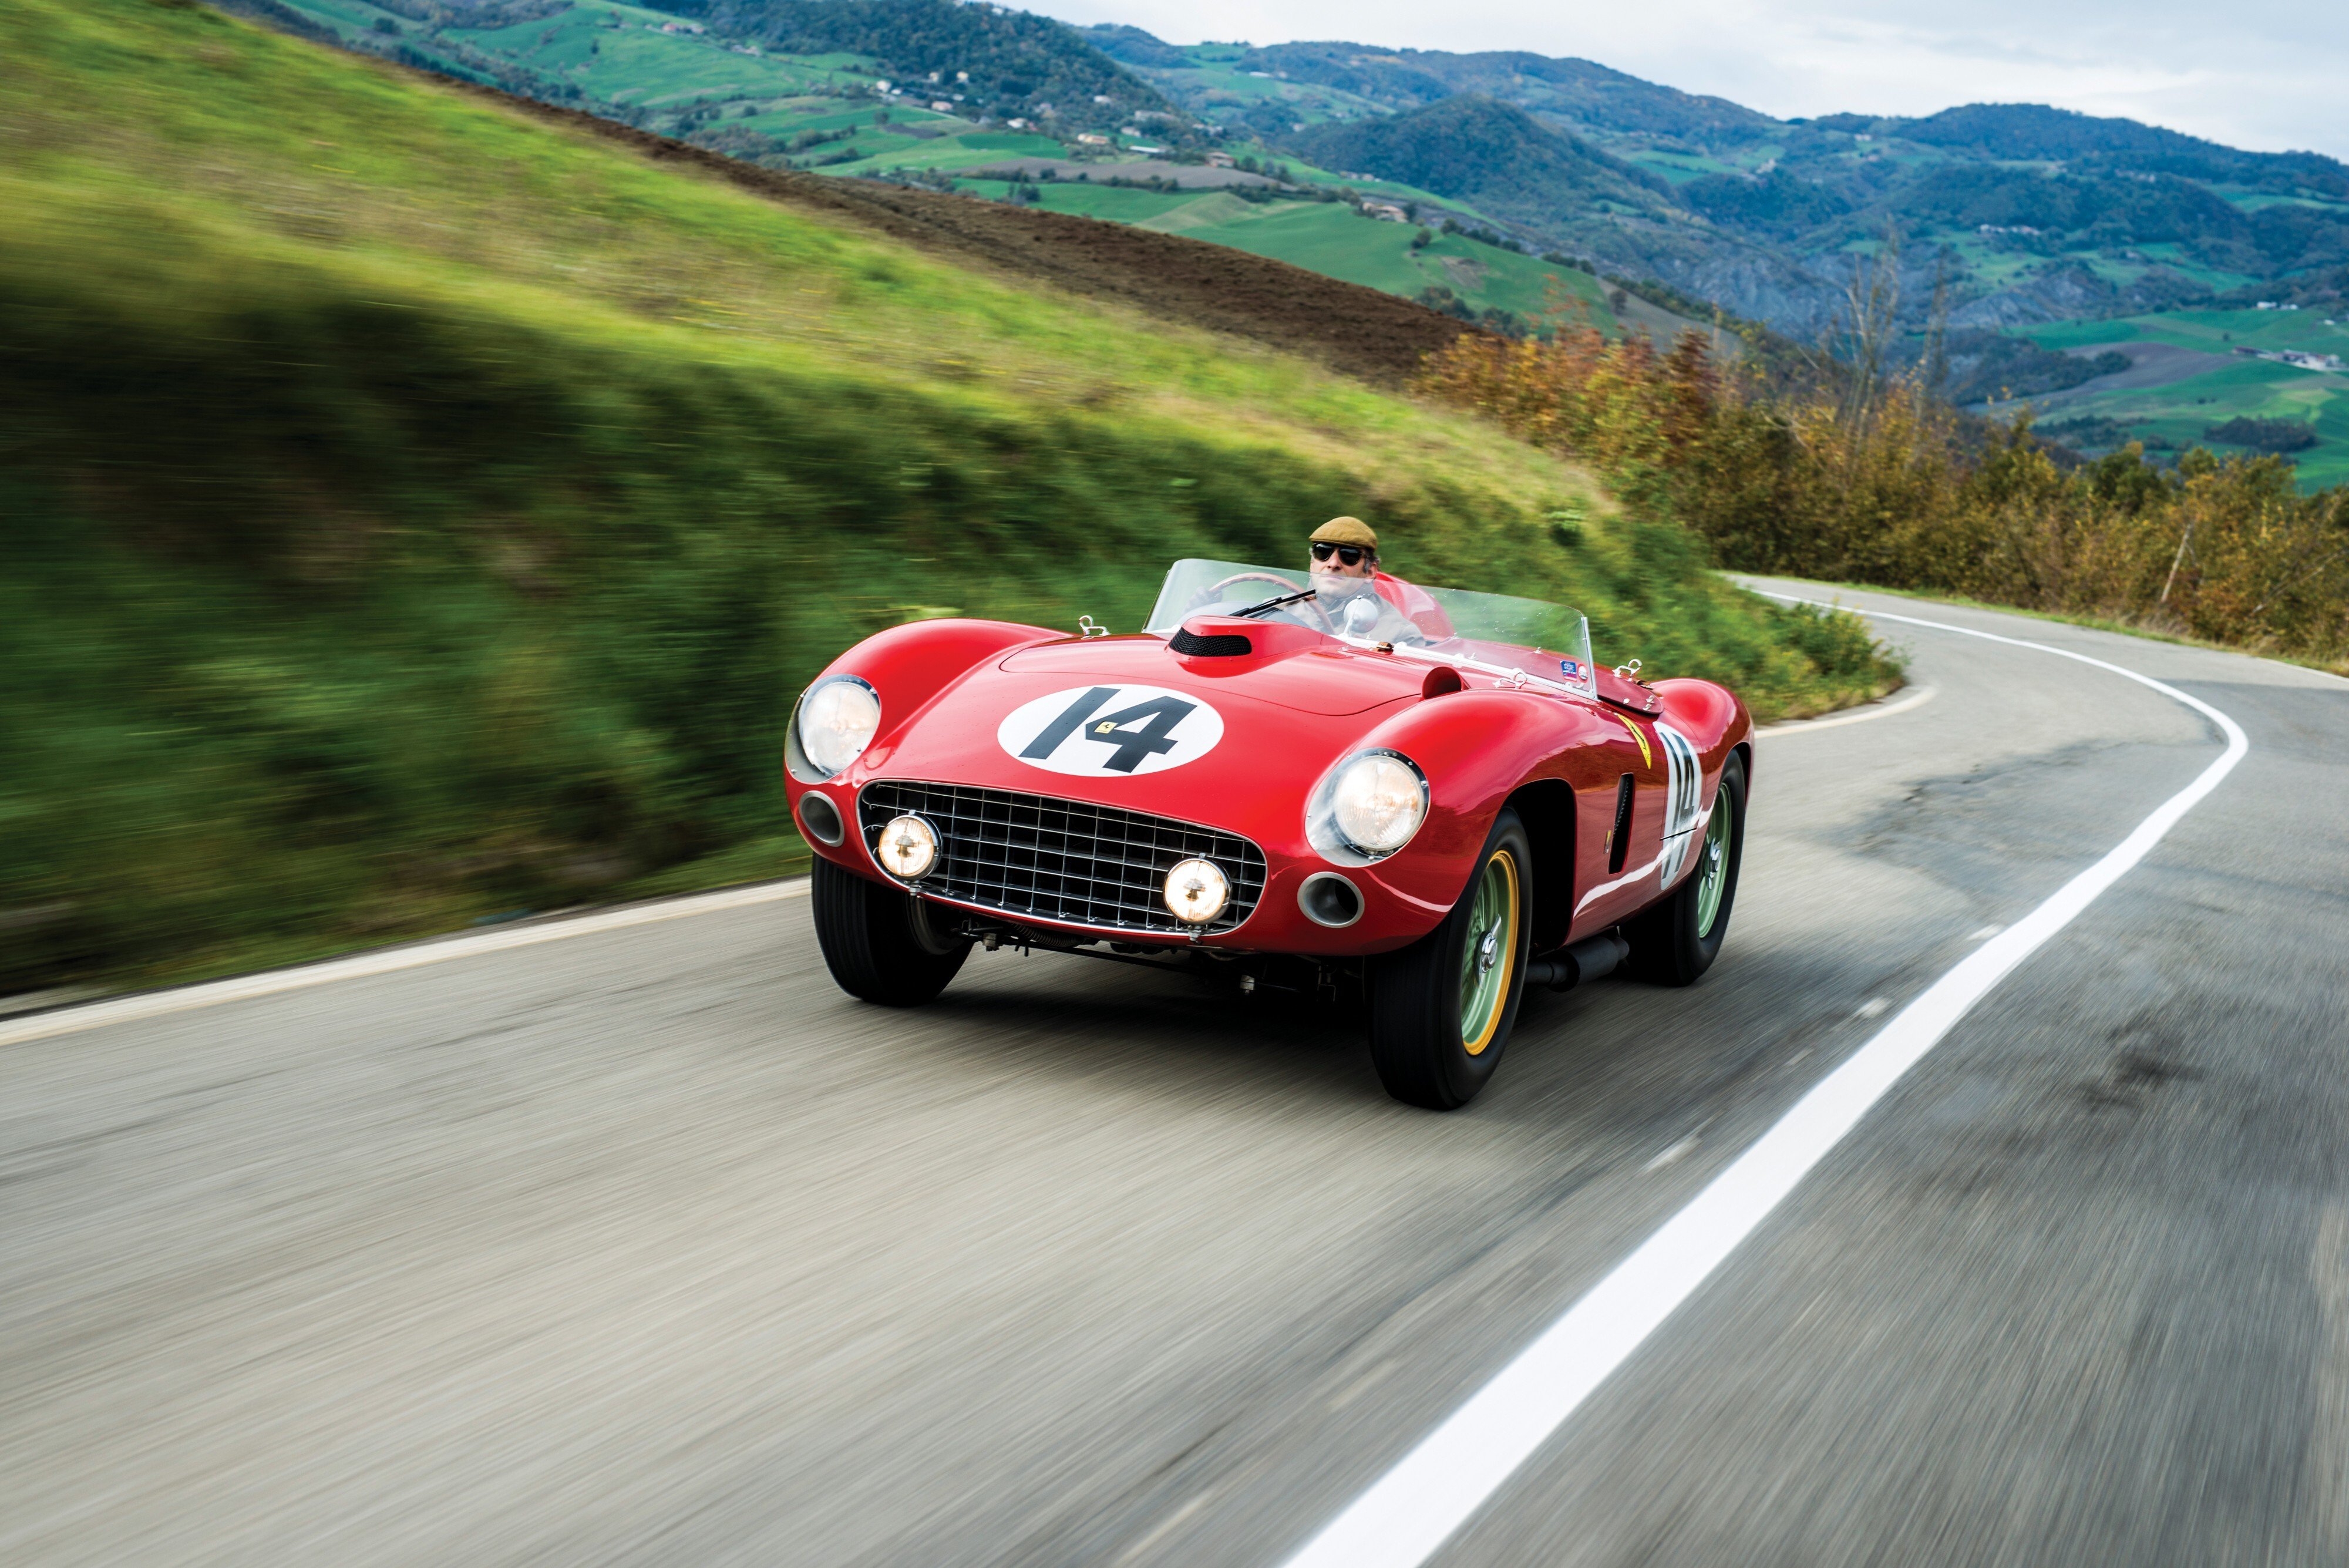 The 1956 Ferrari 290 MM by Scaglietti is one of the most expensive cars ever sold – but what takes the top spot? Photo: RM Sotheby's